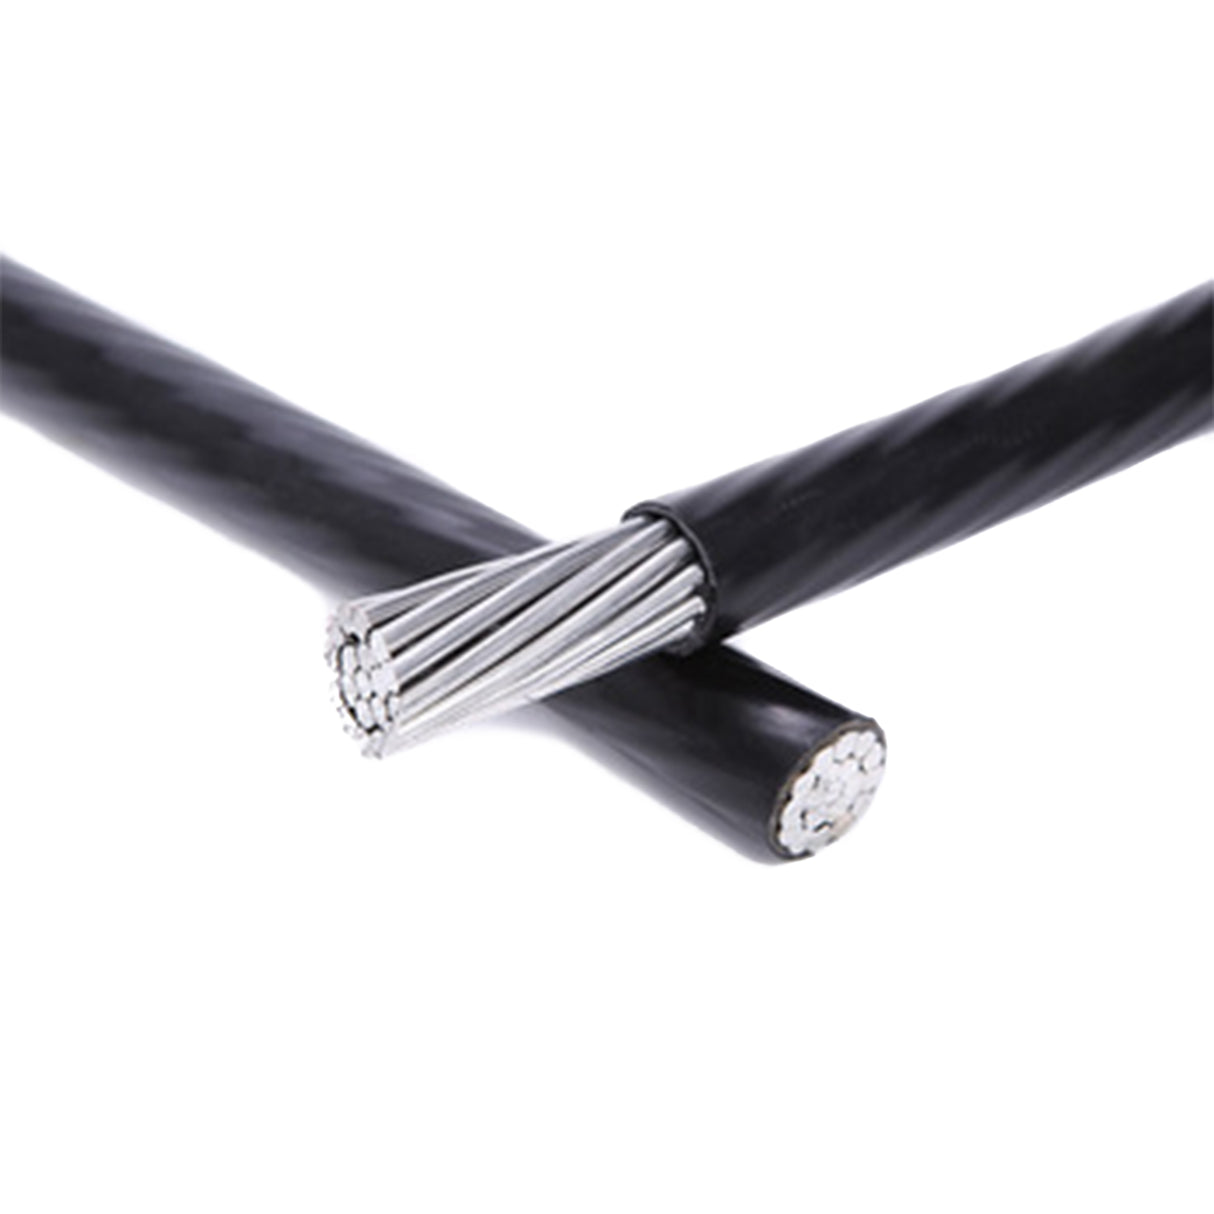 Connect Power Cable 15 Meters